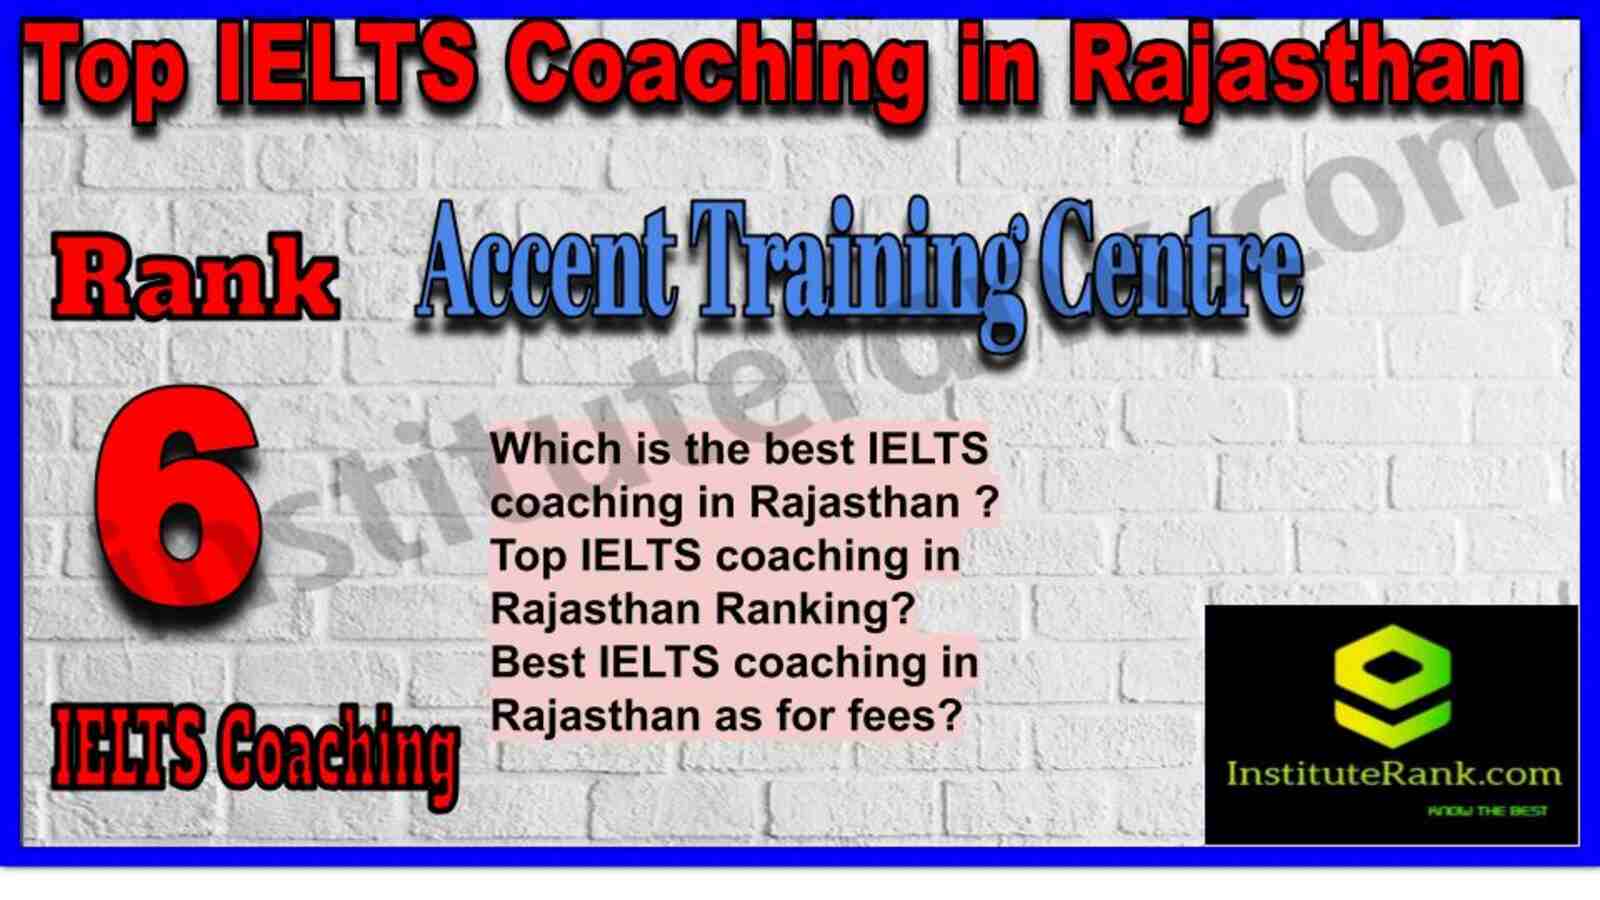 Rank 6. Accent Training Centre | Best IELTS Coaching in Rajasthan